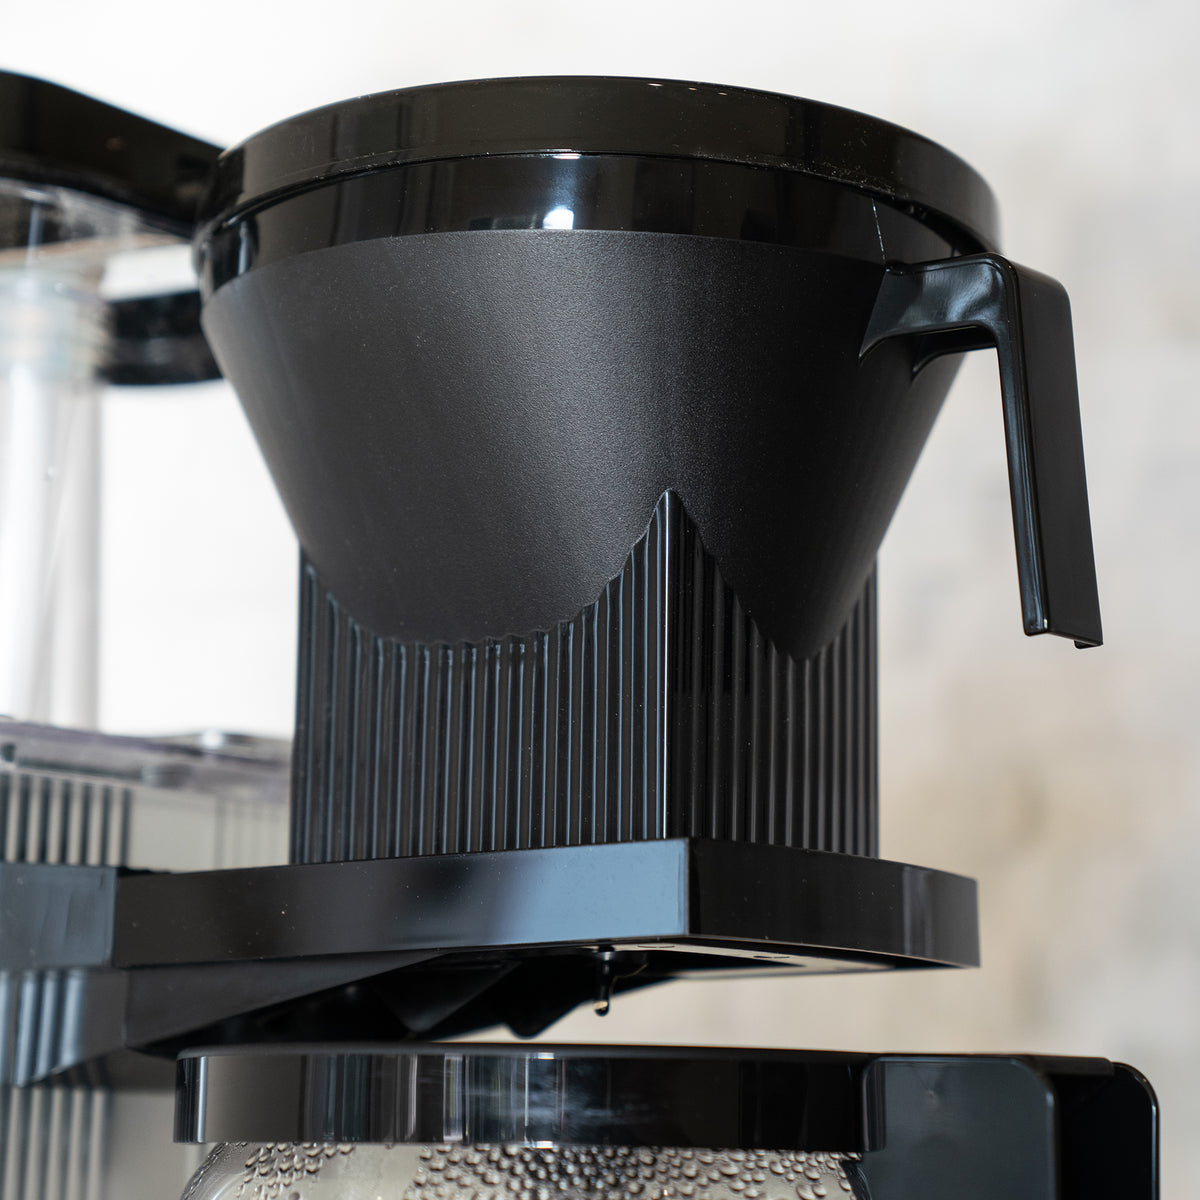 Close up of an Automatic Drip-Stop Brew Basket on a Moccamaster coffee brewer.